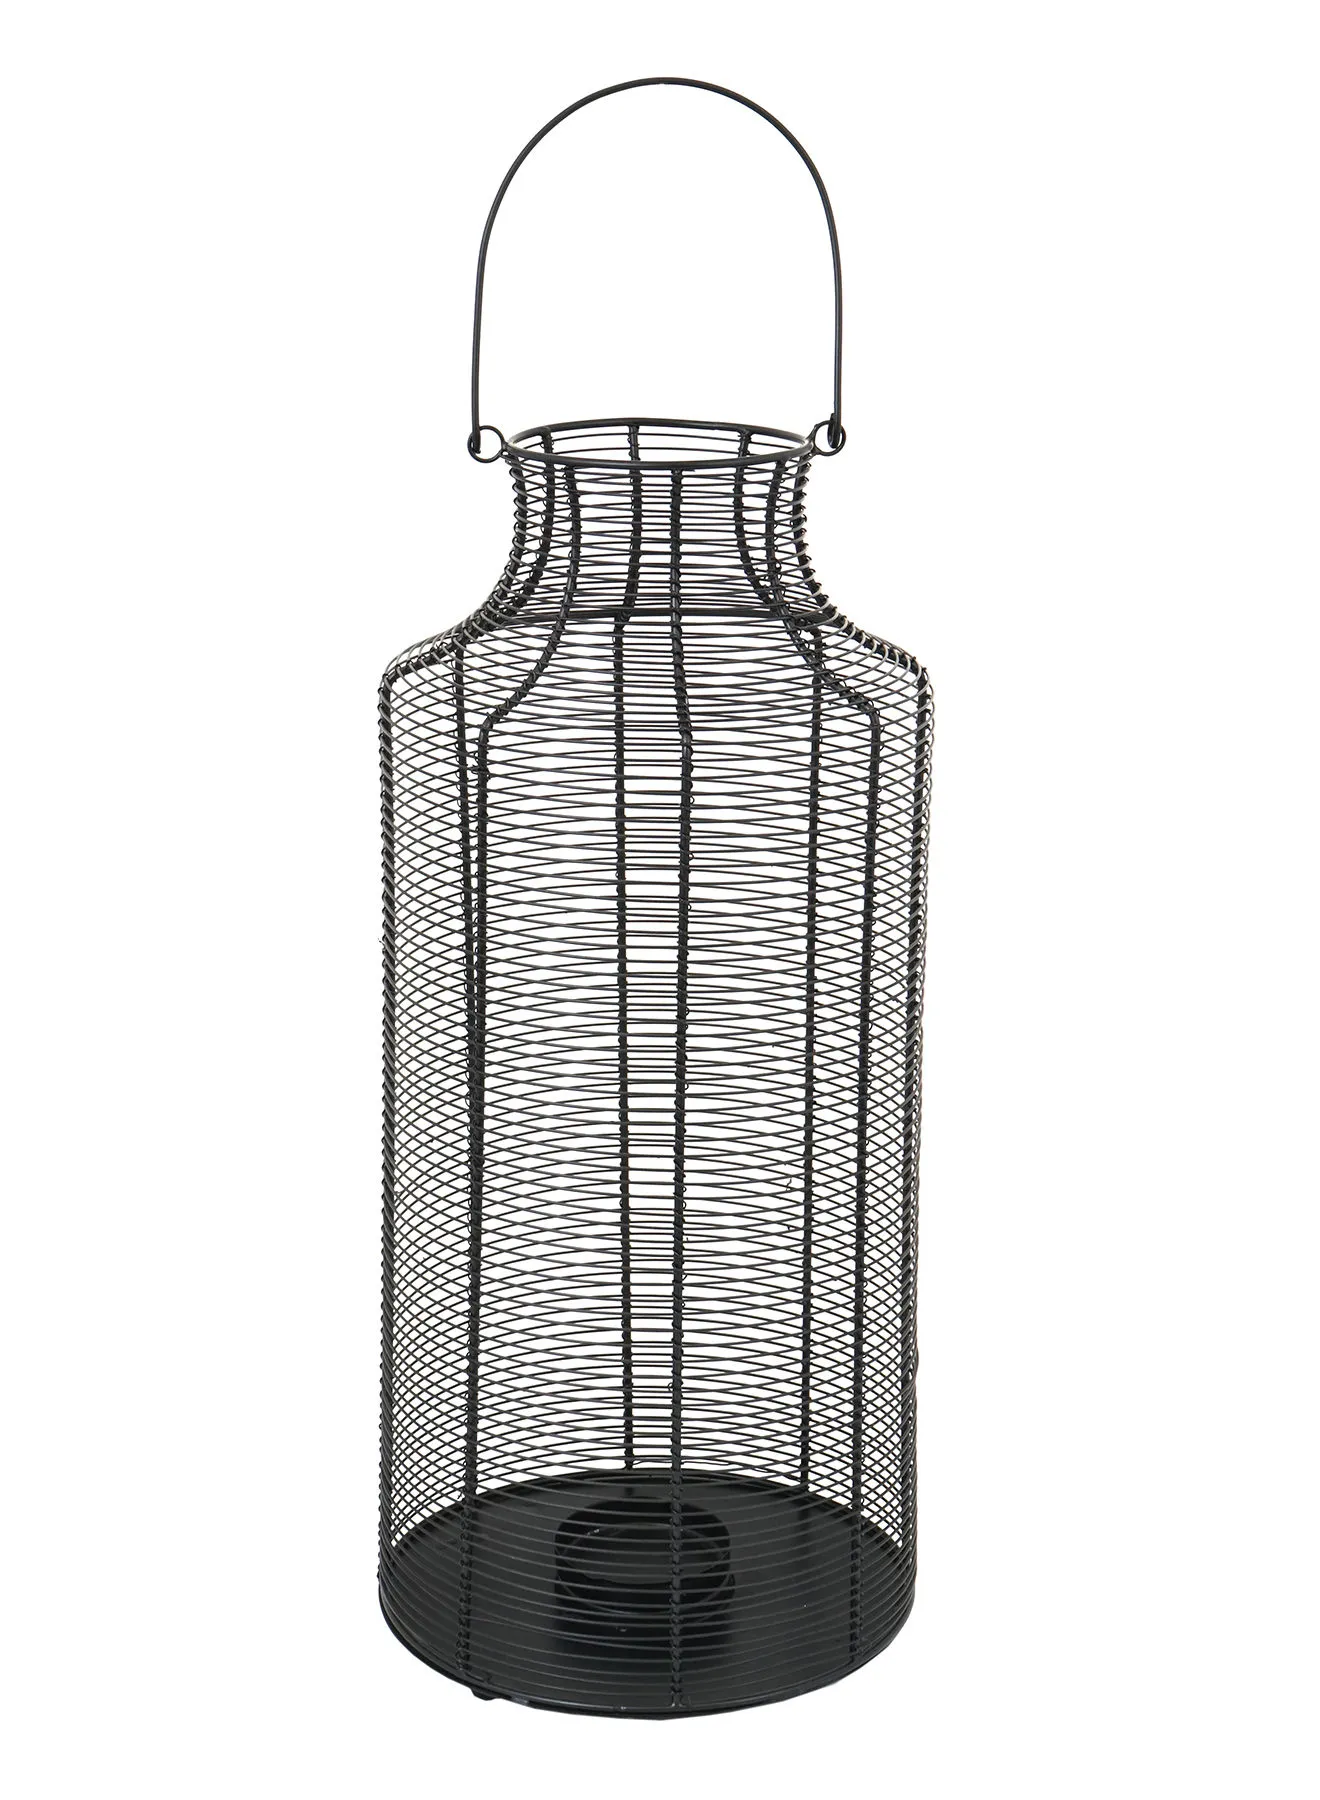 ebb & flow Handmade Candle Holder Lantern Unique Luxury Quality Scents For The Perfect Stylish Home Black 20.32 x 20.32 x 40centimeter